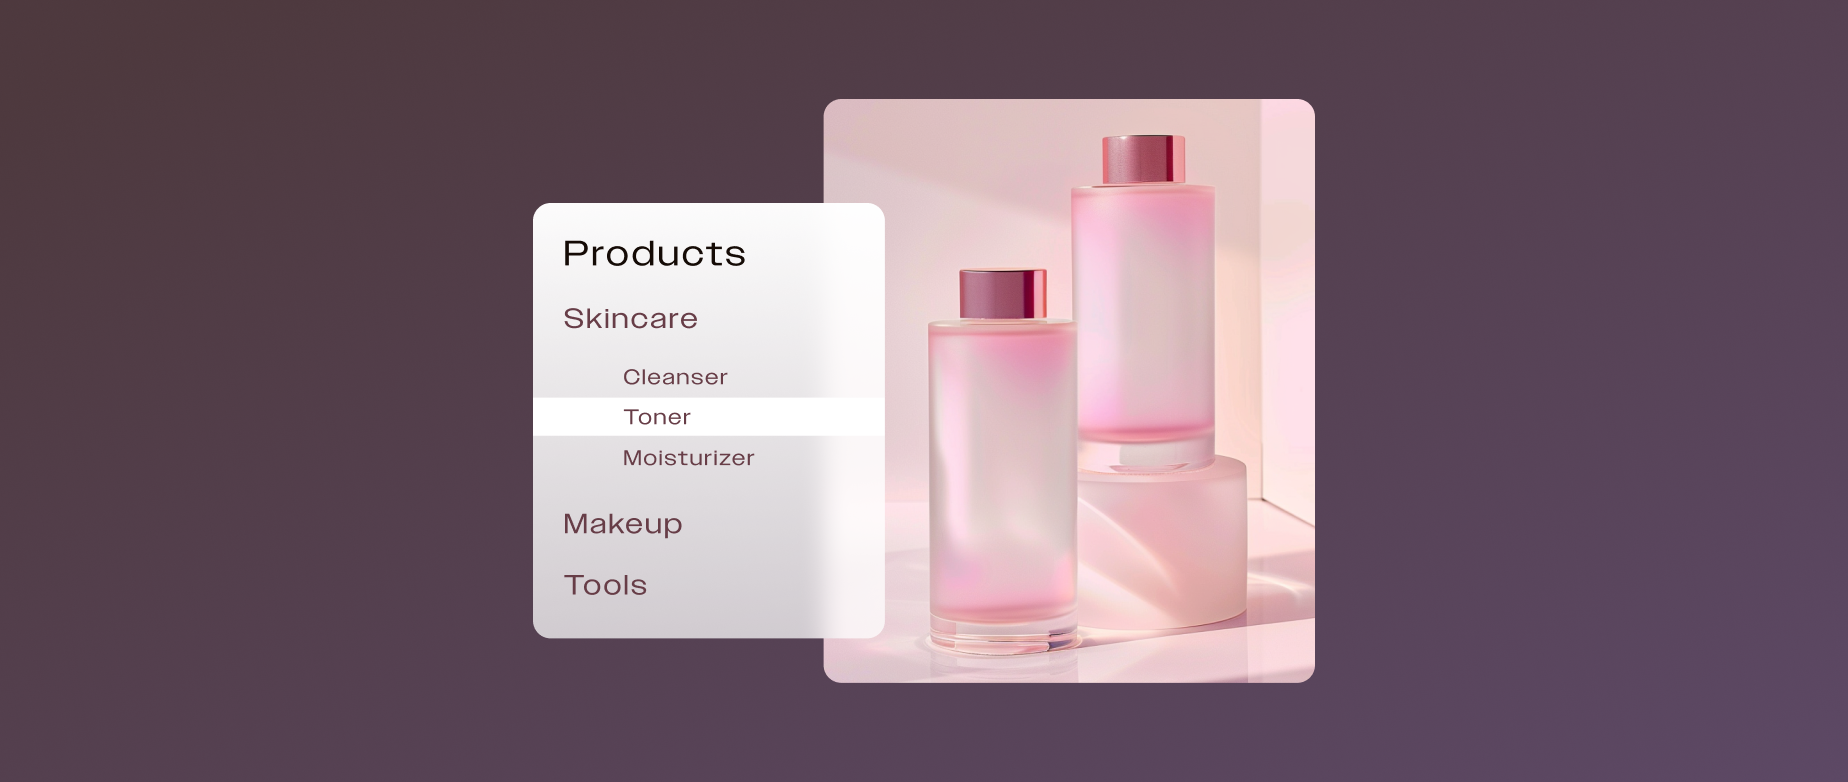 A cosmetic product display with a product category menu next to it on a dark purple background.